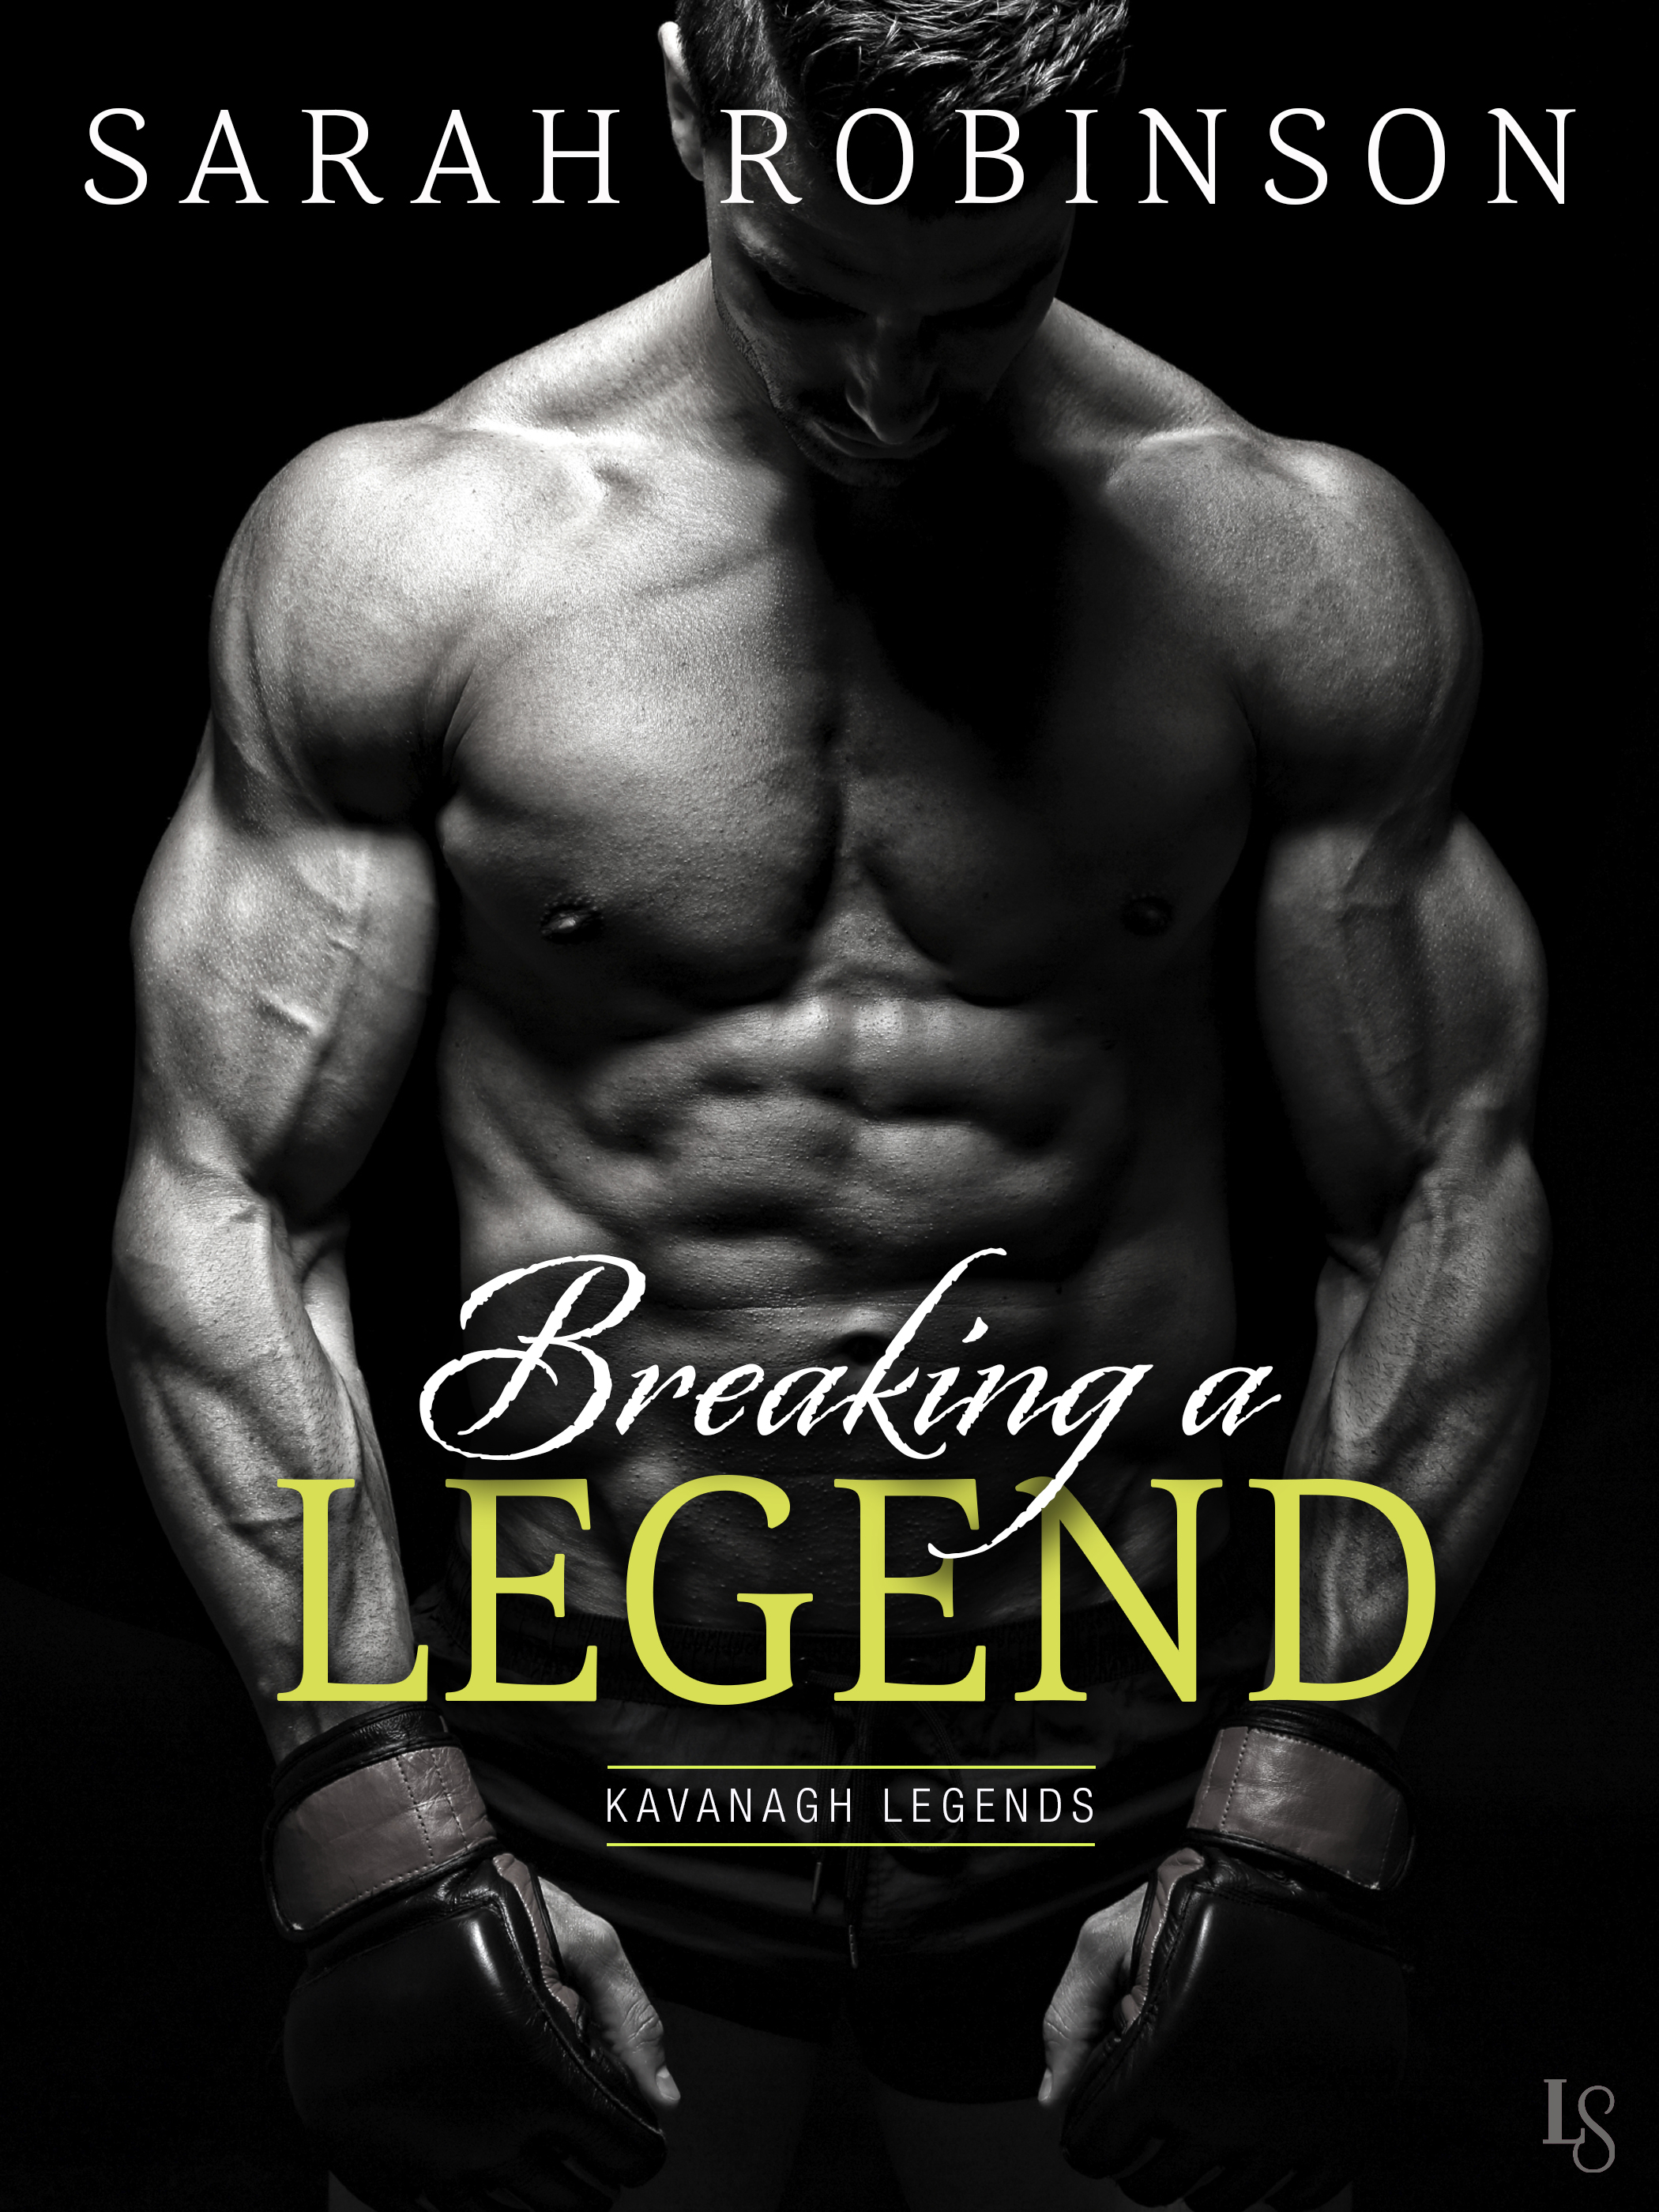 COVER REVEAL! Kavanagh Legends Book 1 is coming…